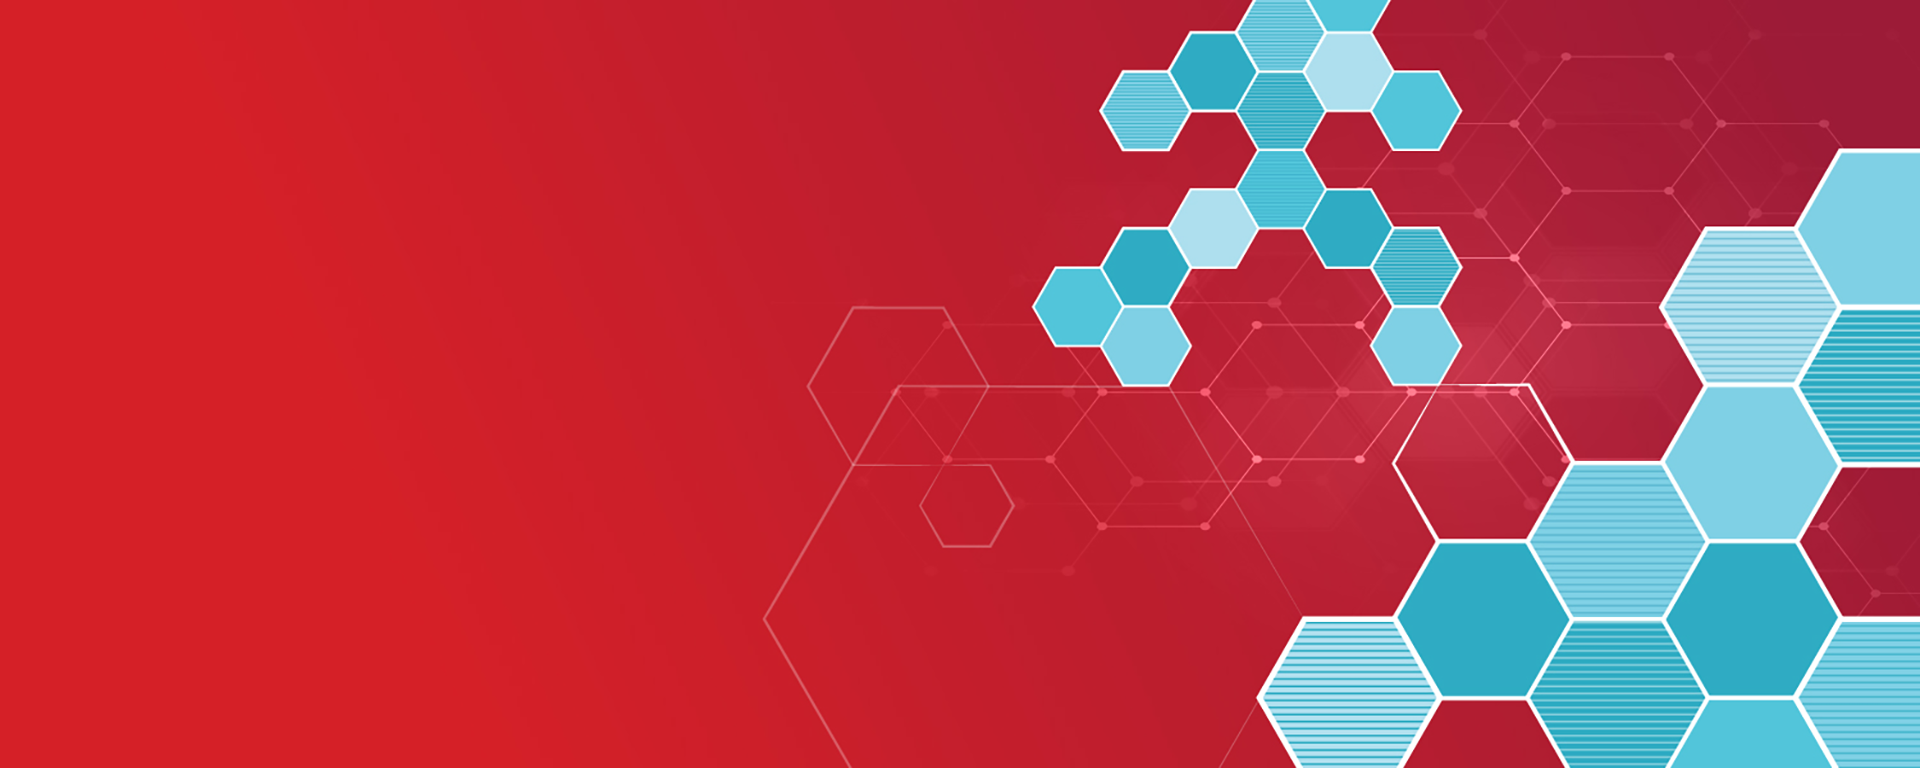 A red background with blue coloured, and outlines of hexagons